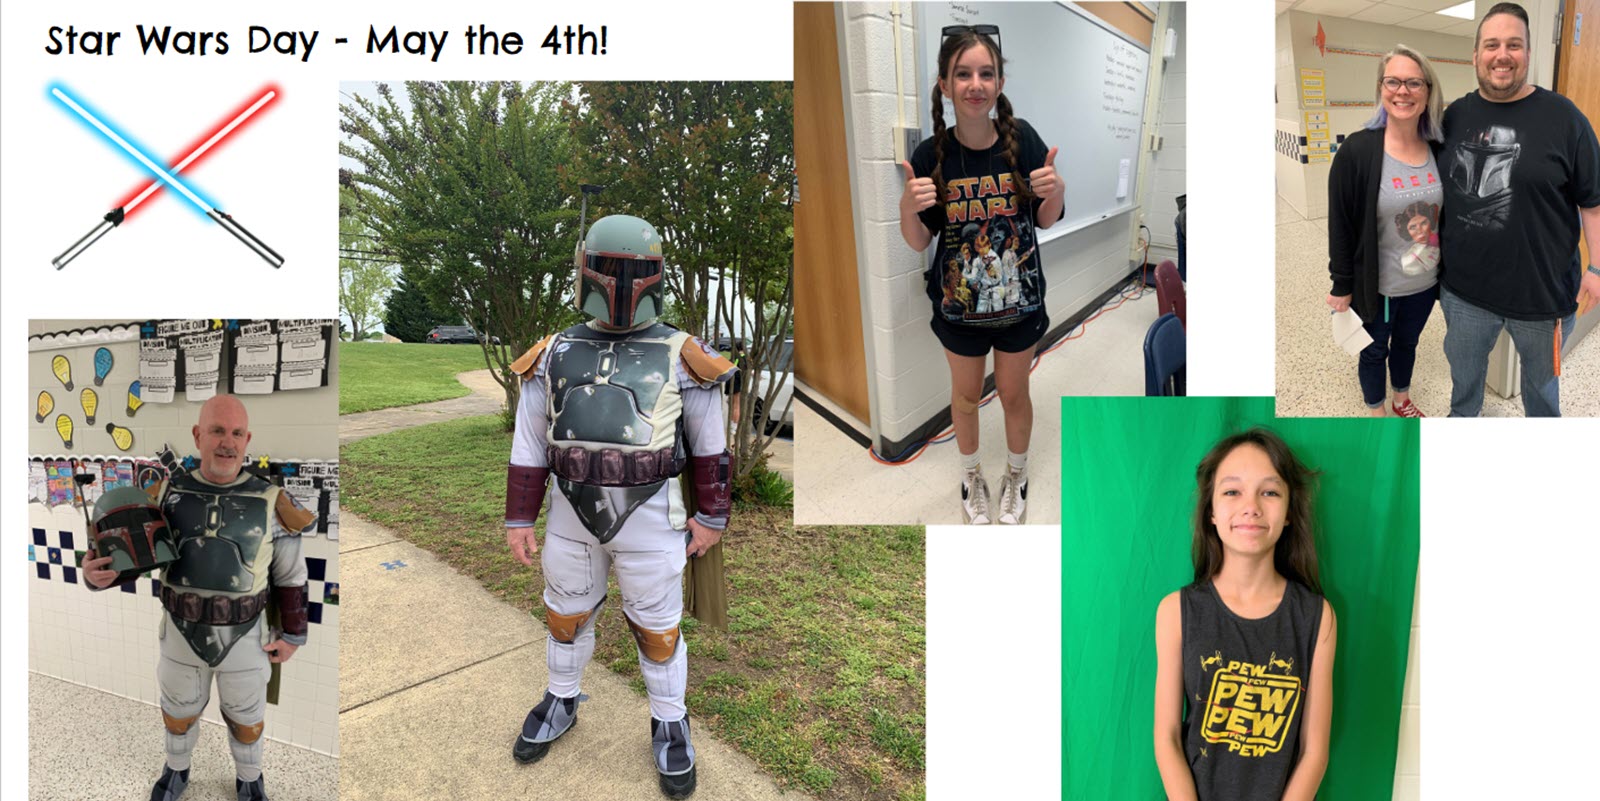 Staff and students in Star Wars shirts